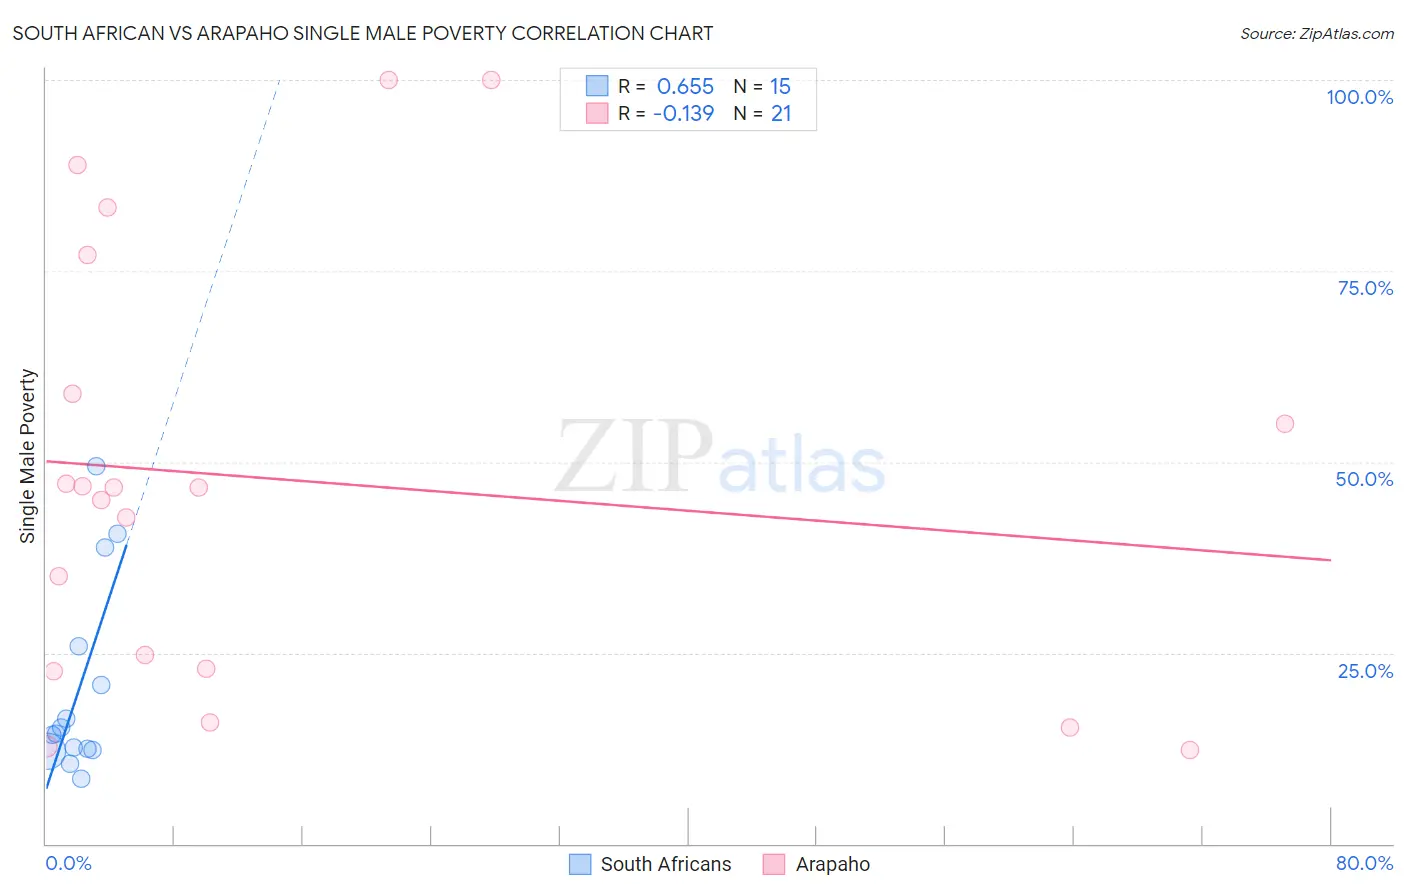 South African vs Arapaho Single Male Poverty